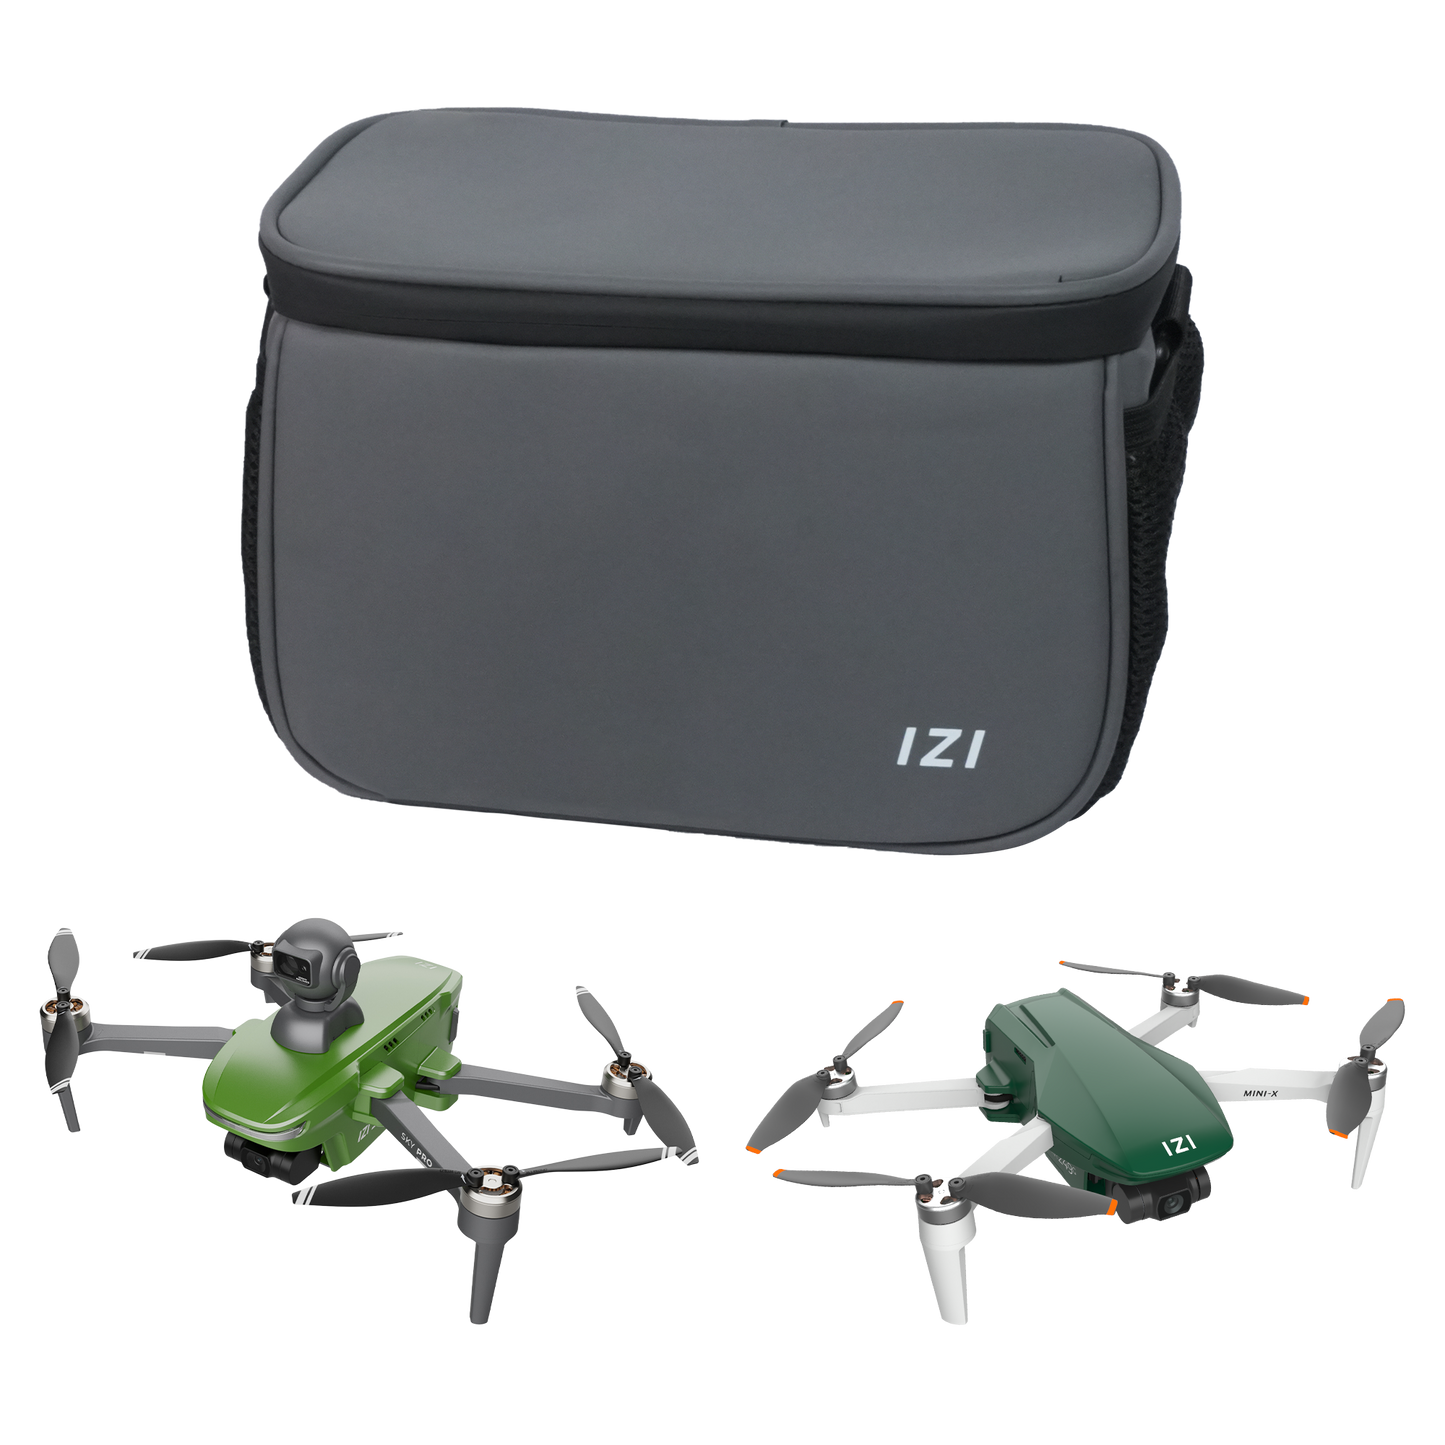 IZI Drones Carrying Bag with Water Resistance, Portable Storage Case for IZI Sky Pro and Mini X, Durable Travel Bag for Full Drone Accessories Kit